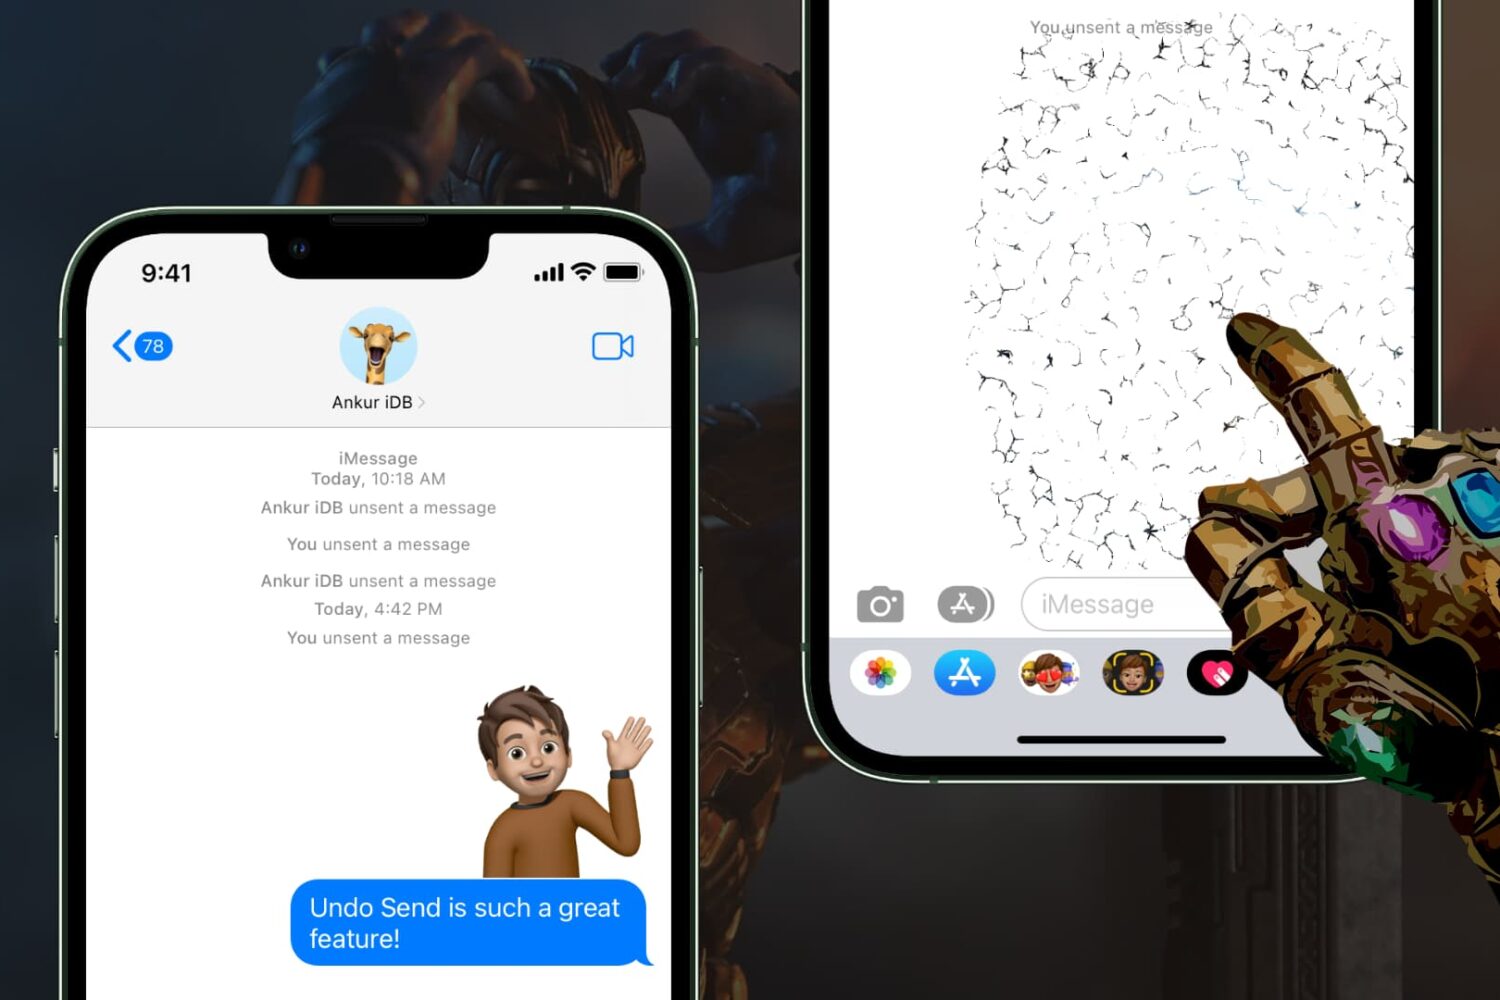 Two iPhone screenshots showing the iPhone Undo Send feature in action with Thanos in the background and Thano's hand gesturing the erase action